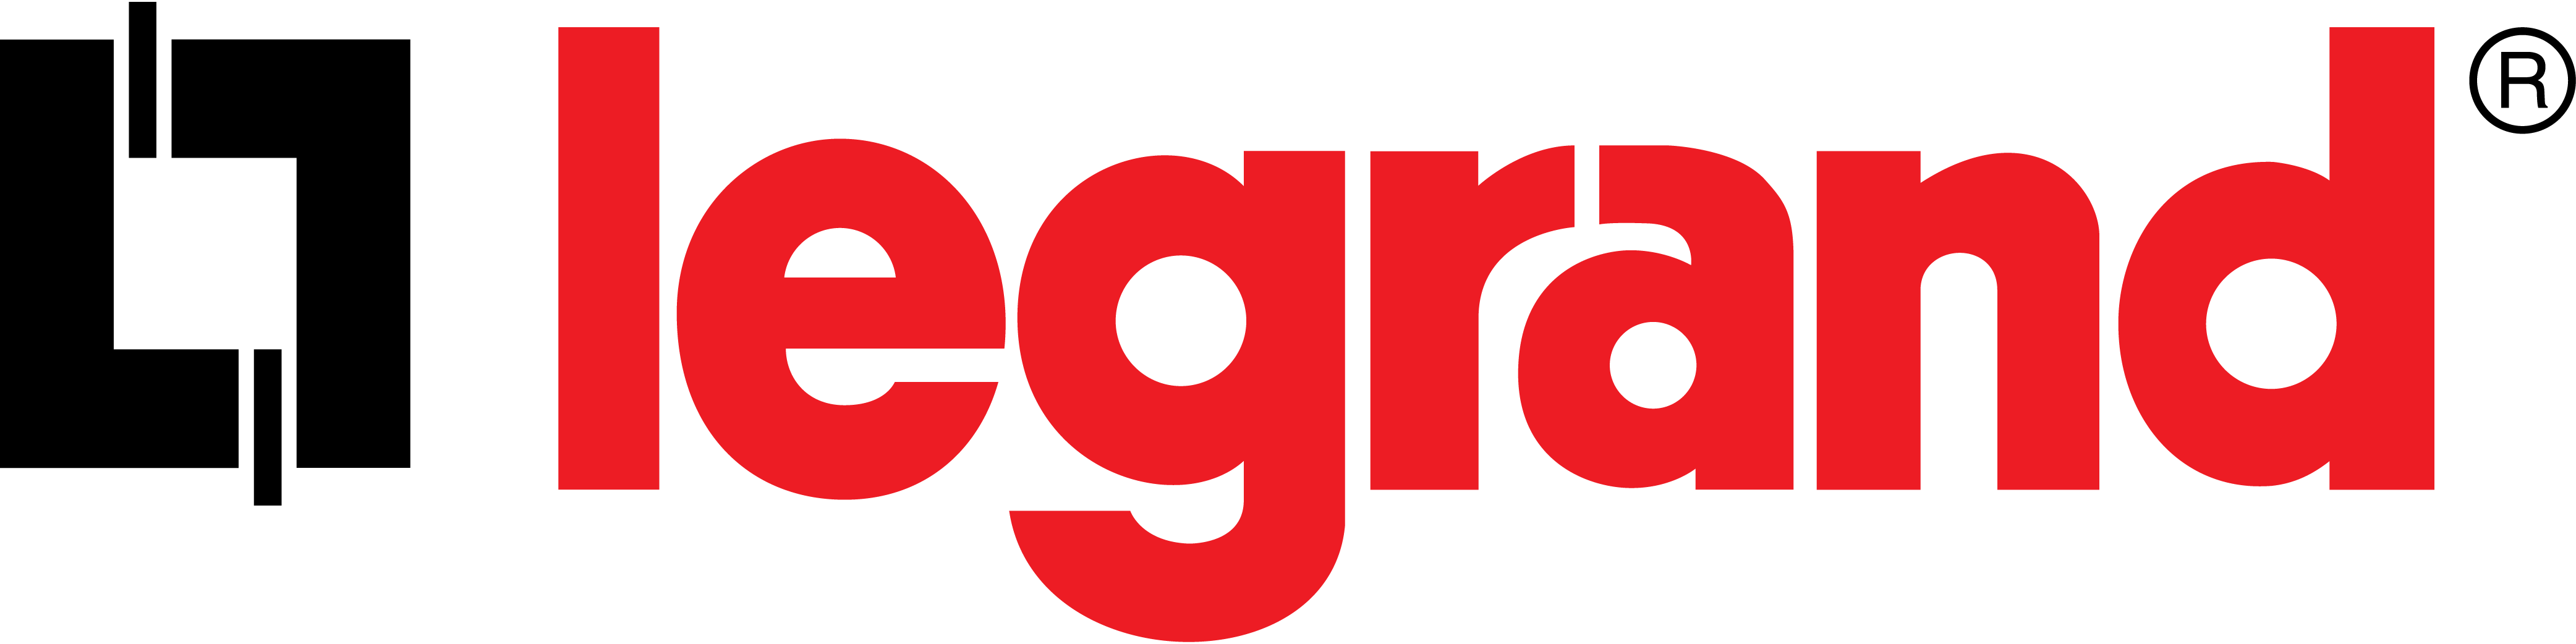 Legrand-Red-PNG